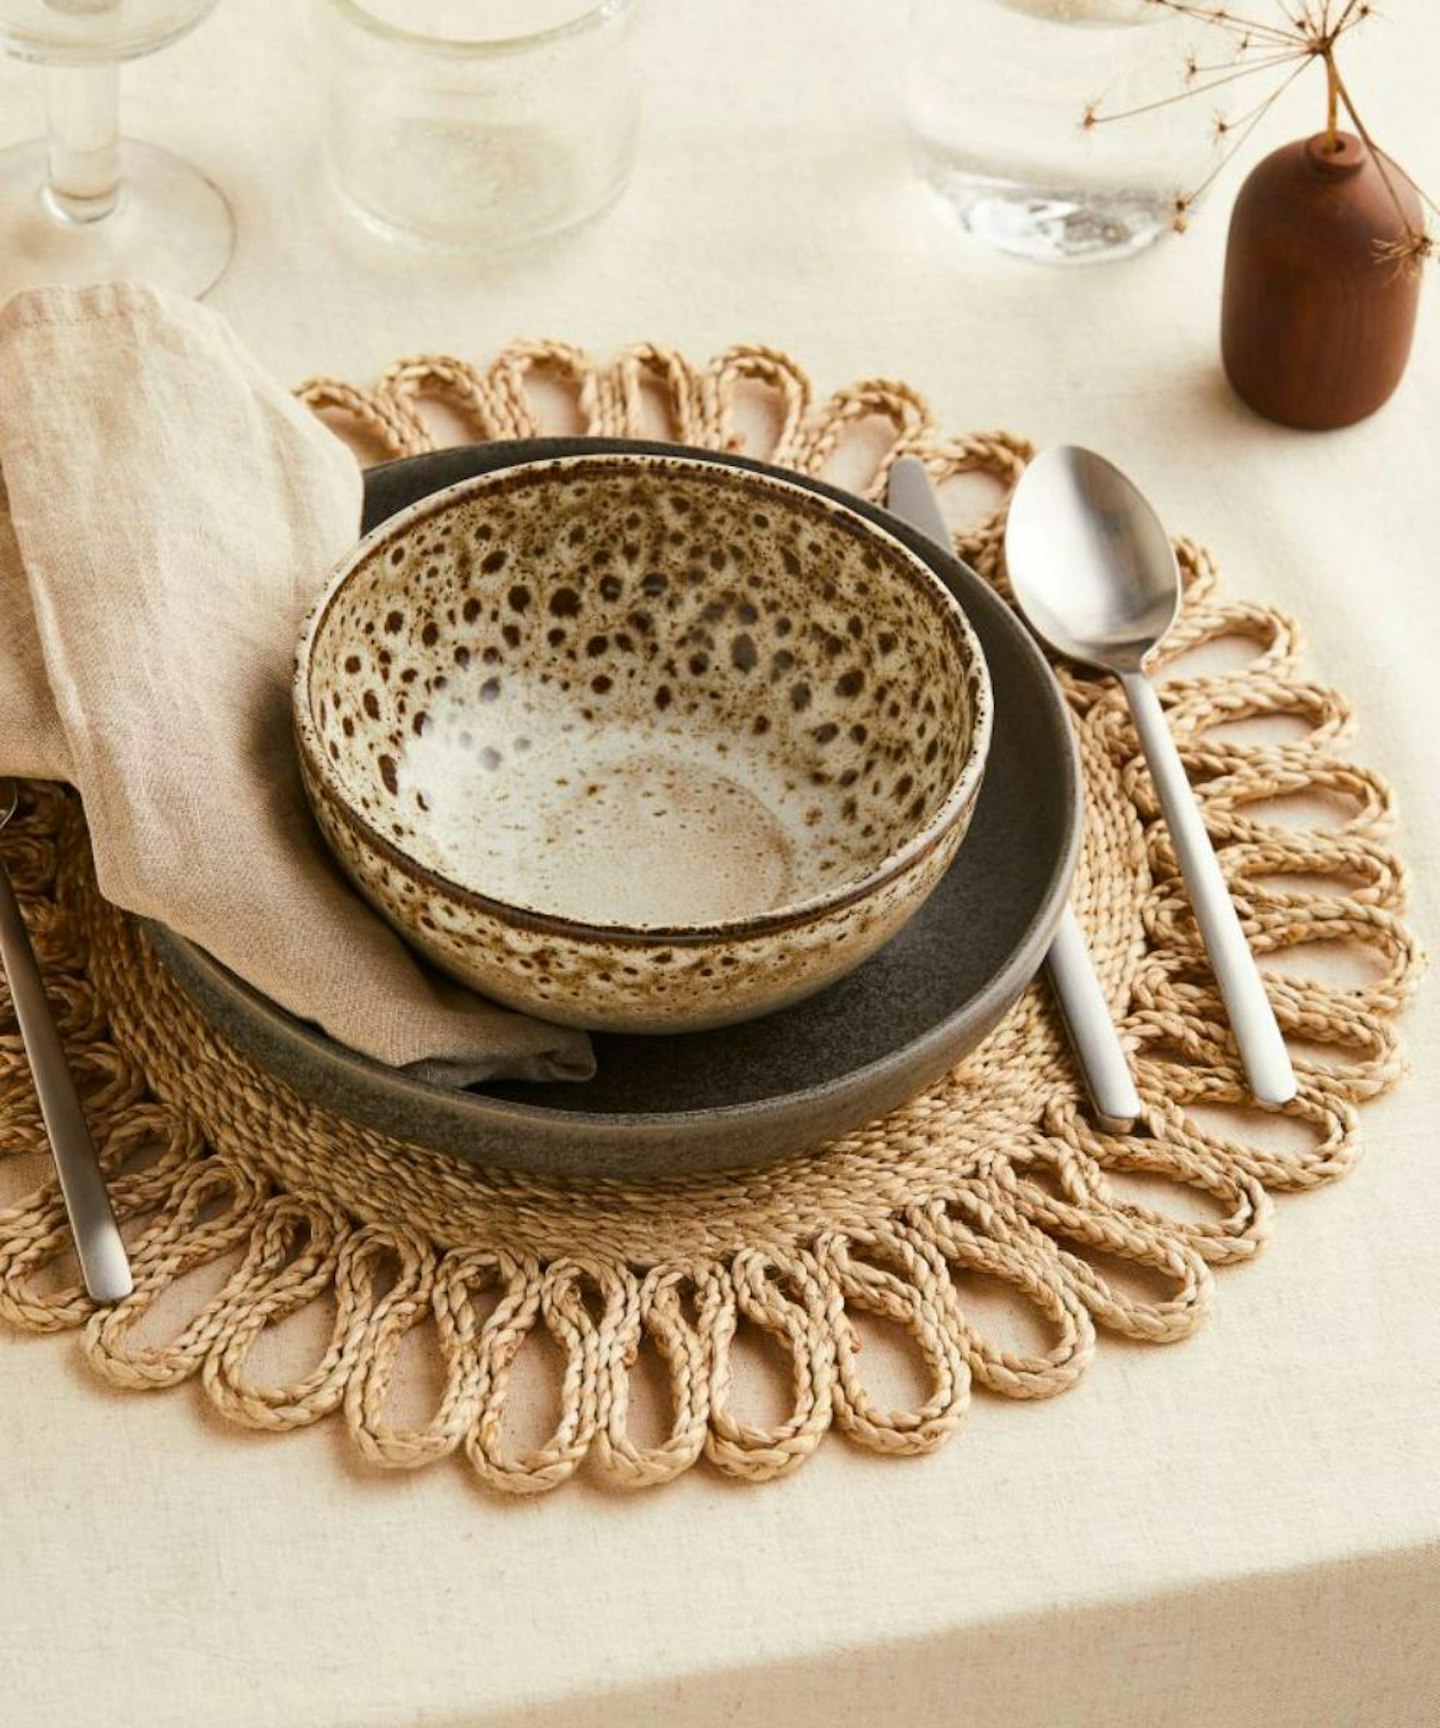 H&M, Hole-patterned table mat